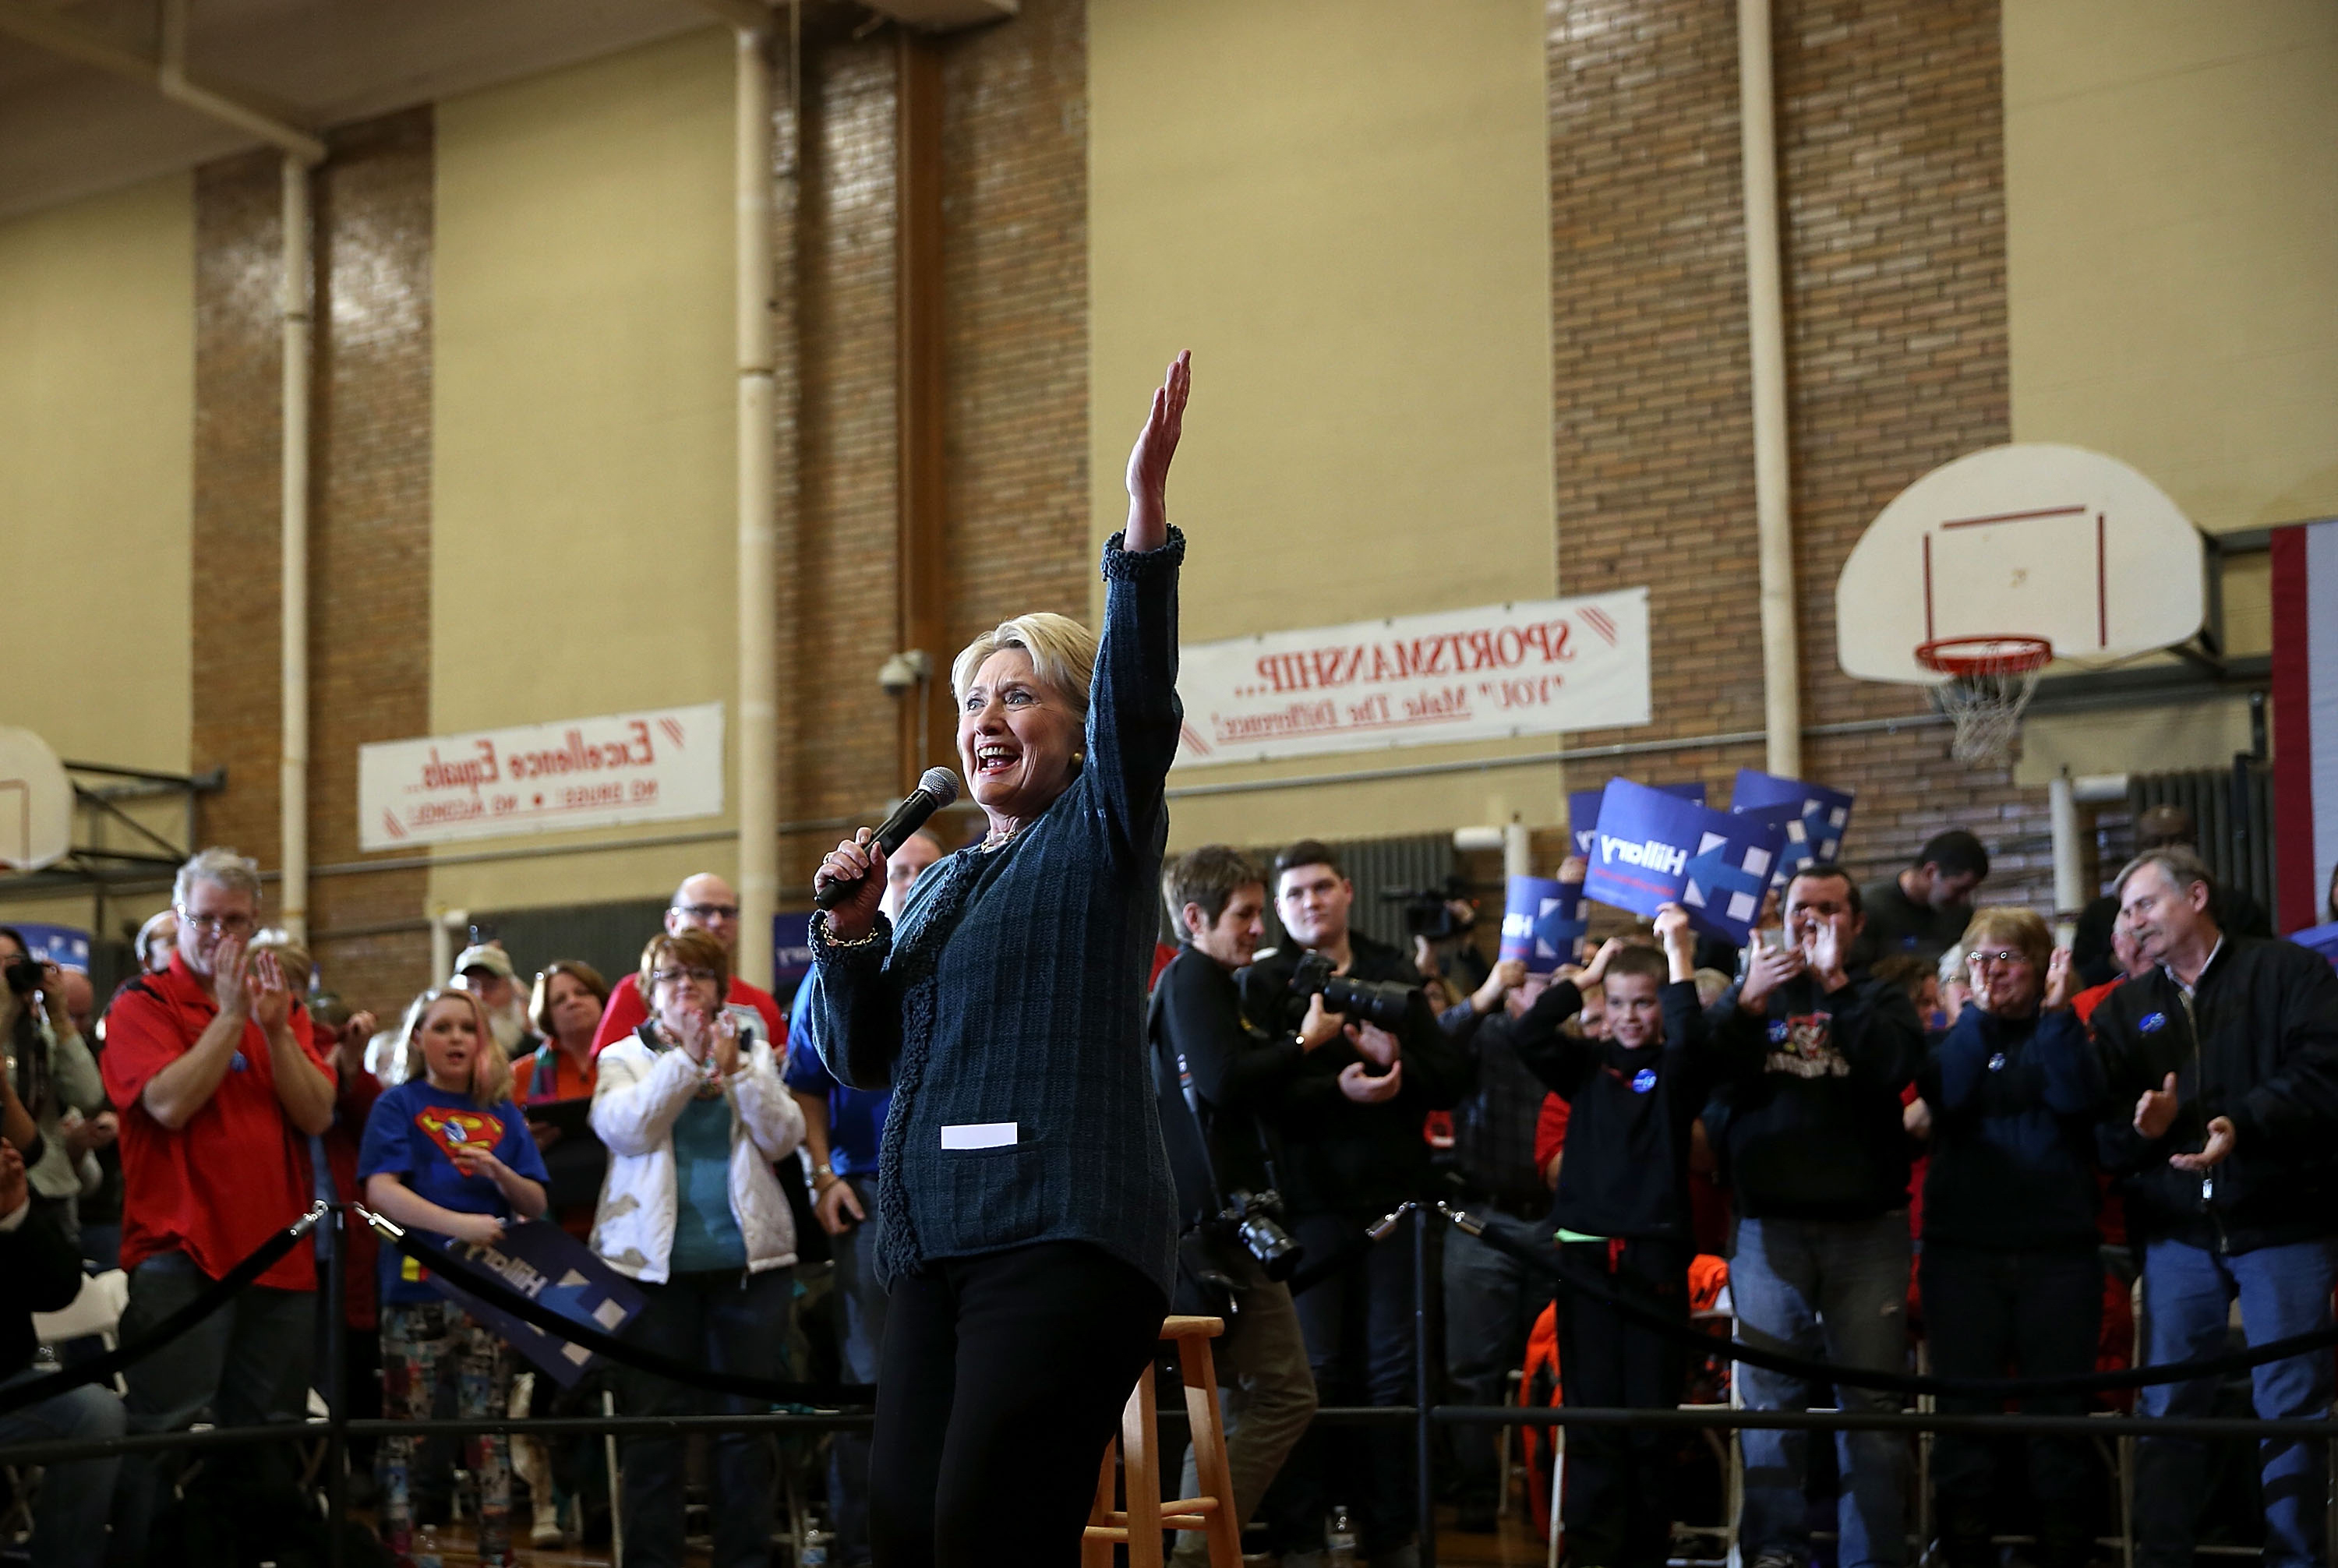 MARSHALLTOWN, IA - JANUARY 26: Democratic presidential candidate former Secretary of State Hillary Clinton speaks during a "get out the caucus" event at BR Miller Middle School on January 26, 2016 in Marshalltown, Iowa. With less than a week to go before the Iowa caucuses, Hillary Clinton is campaigning throughout Iowa. (Photo by Justin Sullivan/Getty Images)